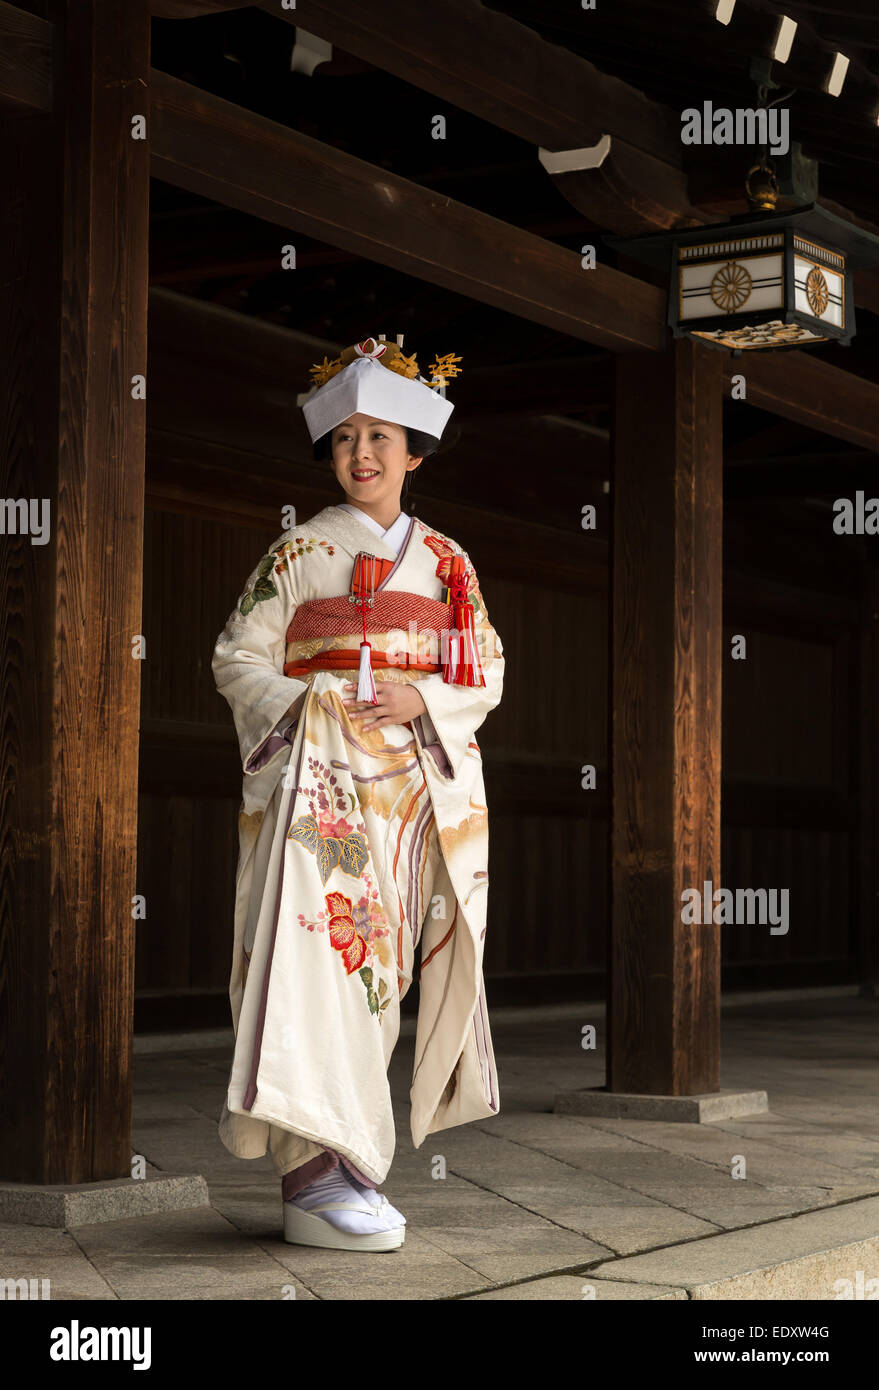 https://c8.alamy.com/comp/EDXW4G/japanese-bride-in-traditional-clothes-at-her-wedding-meiji-shine-meiji-EDXW4G.jpg